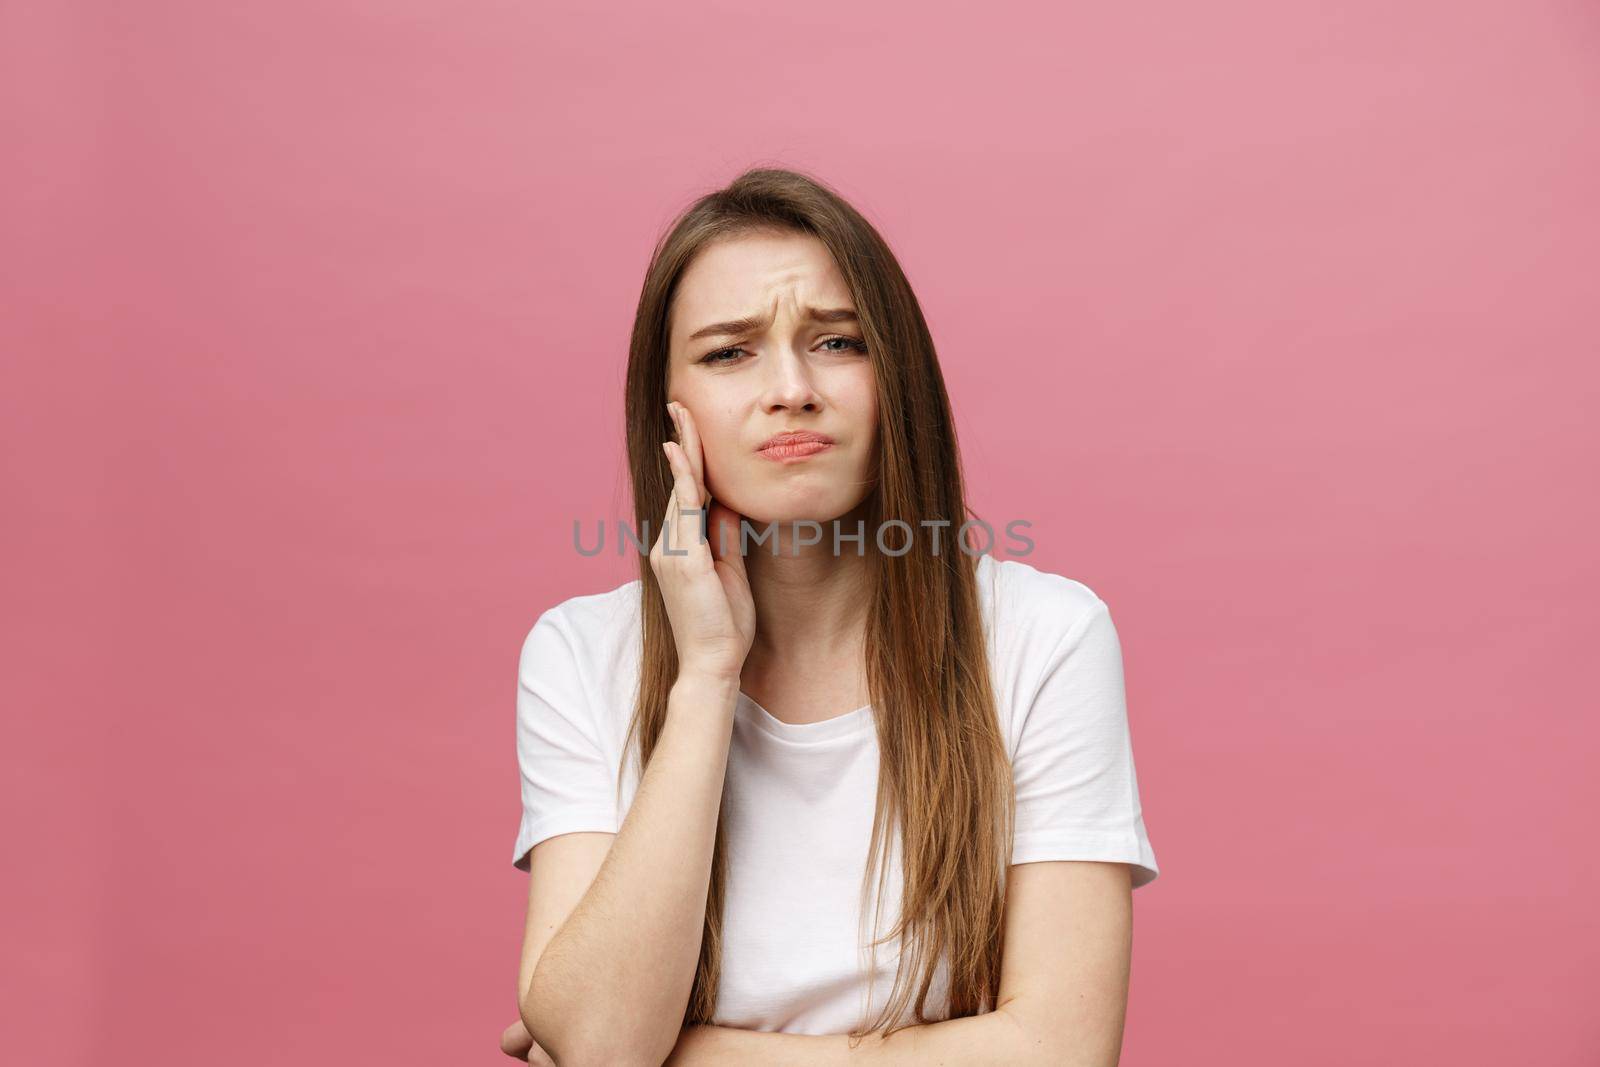 Young caucasian woman over isolated background touching mouth with hand with painful expression because of toothache. Dentist concept.